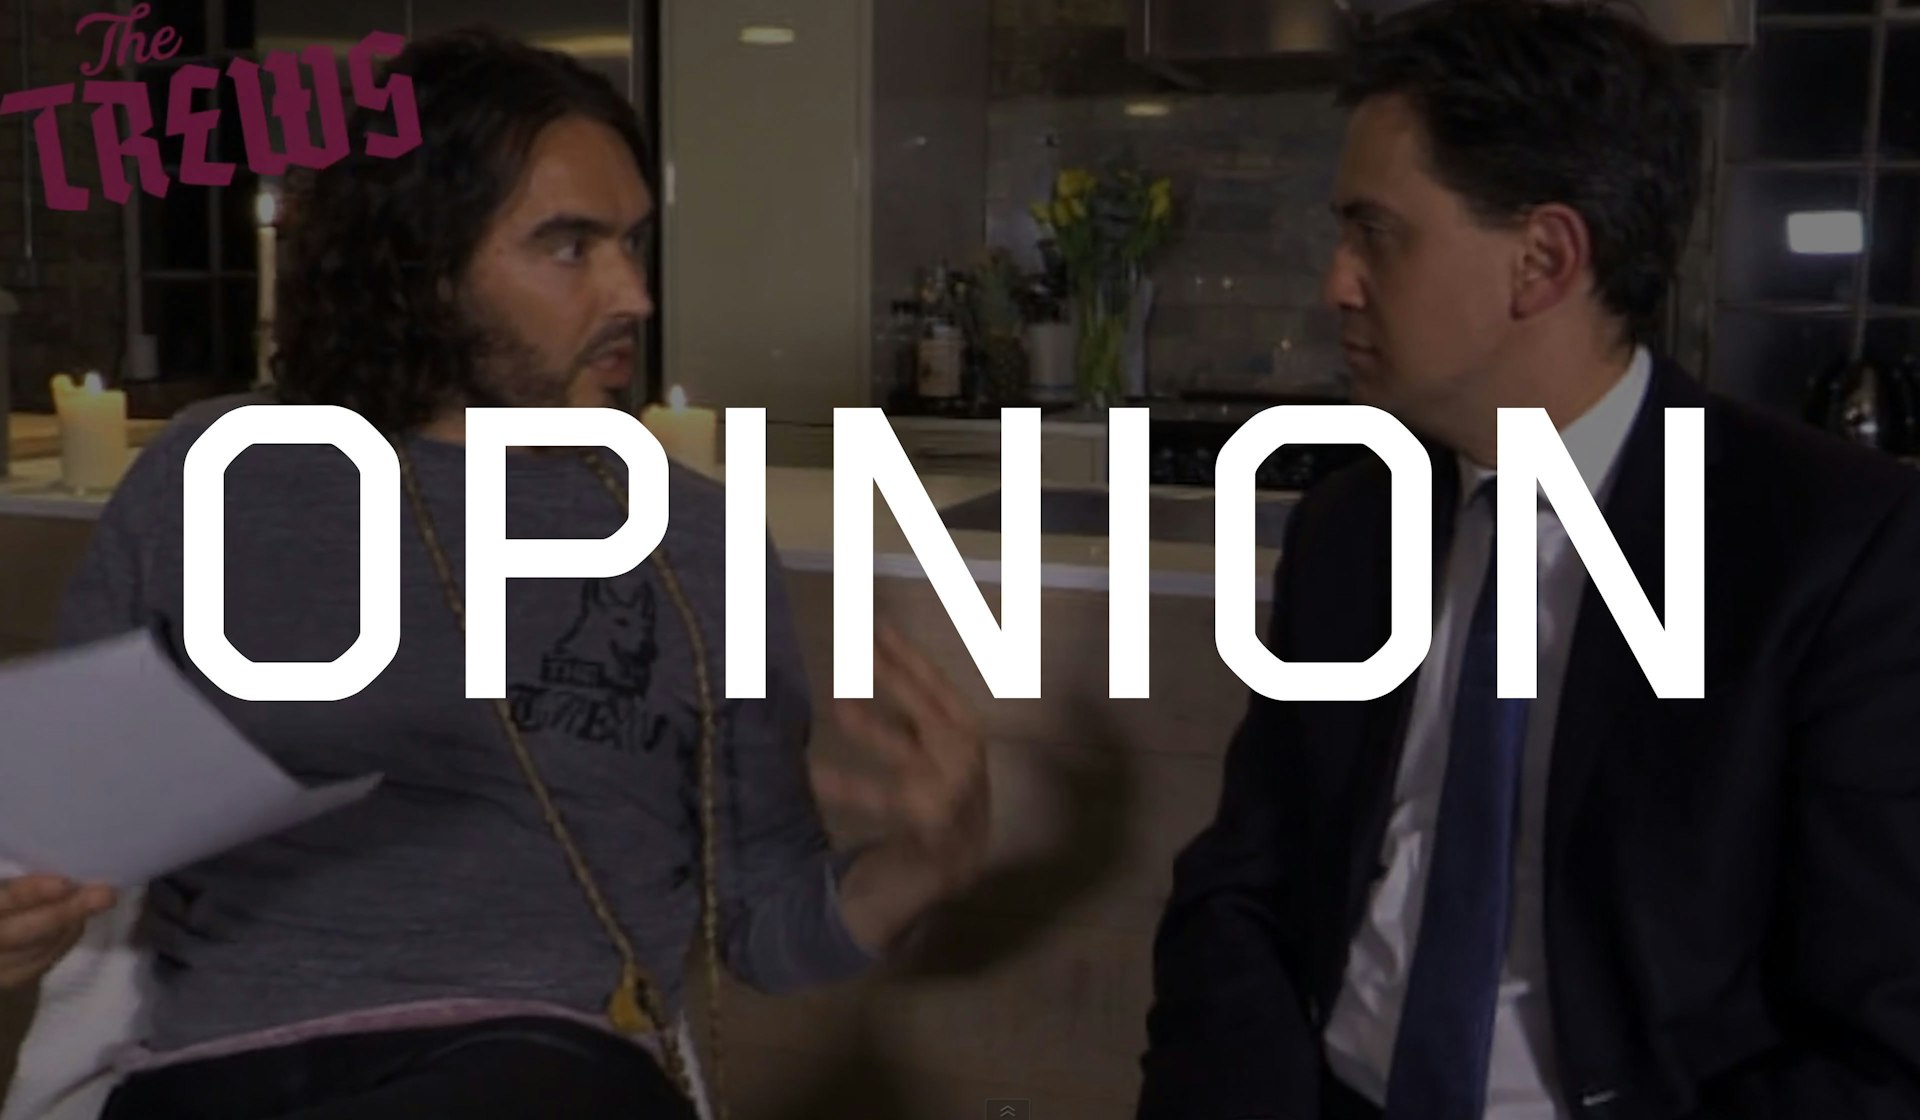 What is Russell Brand doing interviewing Ed Miliband?